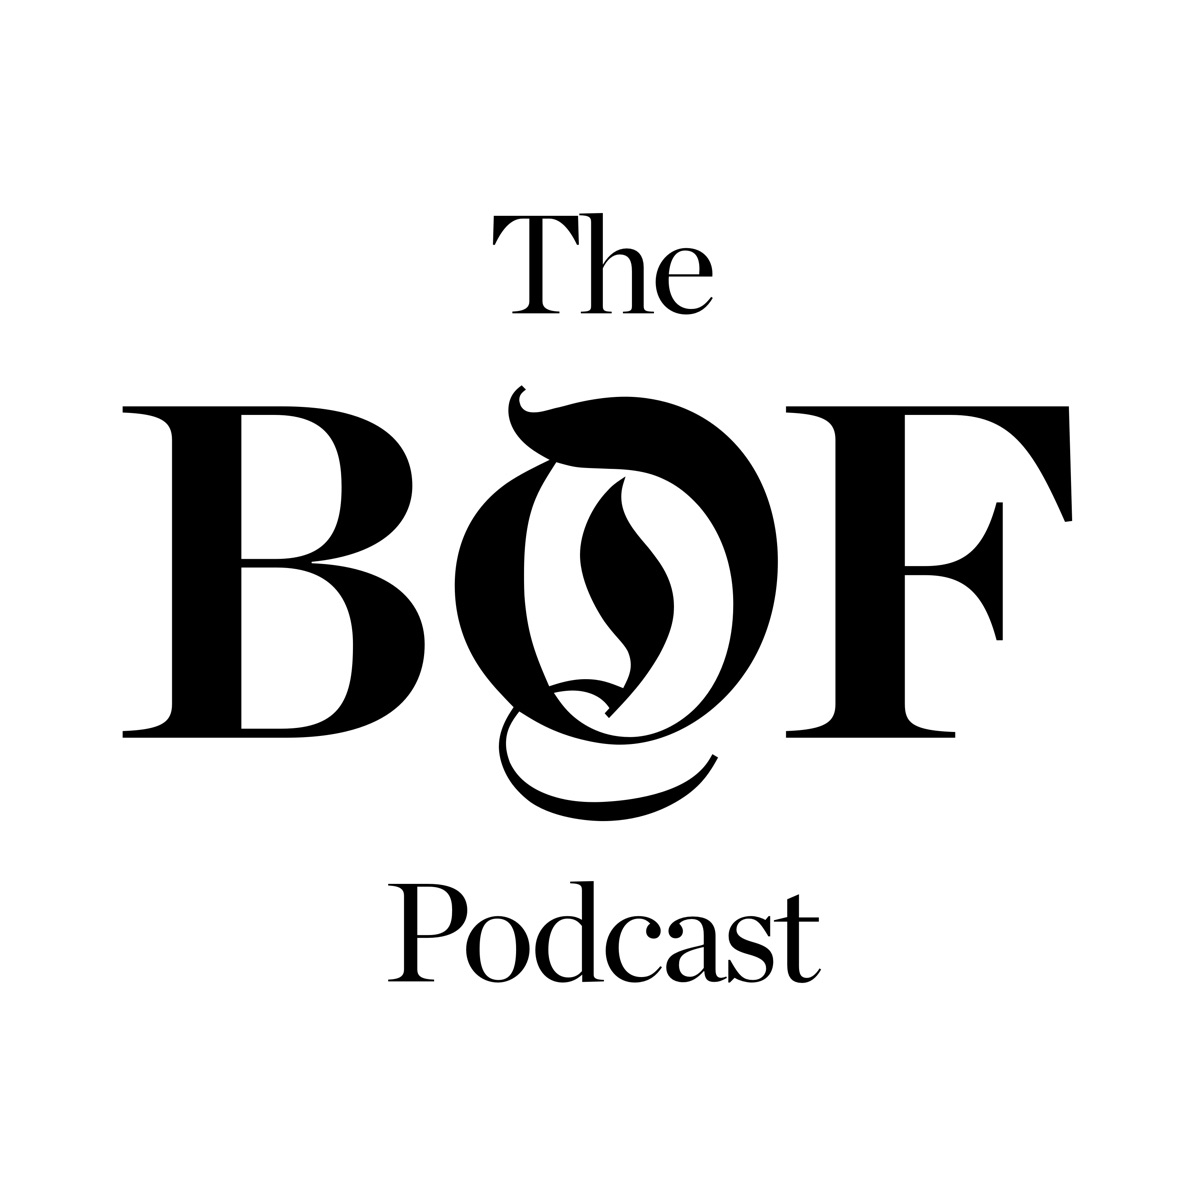 The Business of Fashion Podcast – Podcast – Podtail